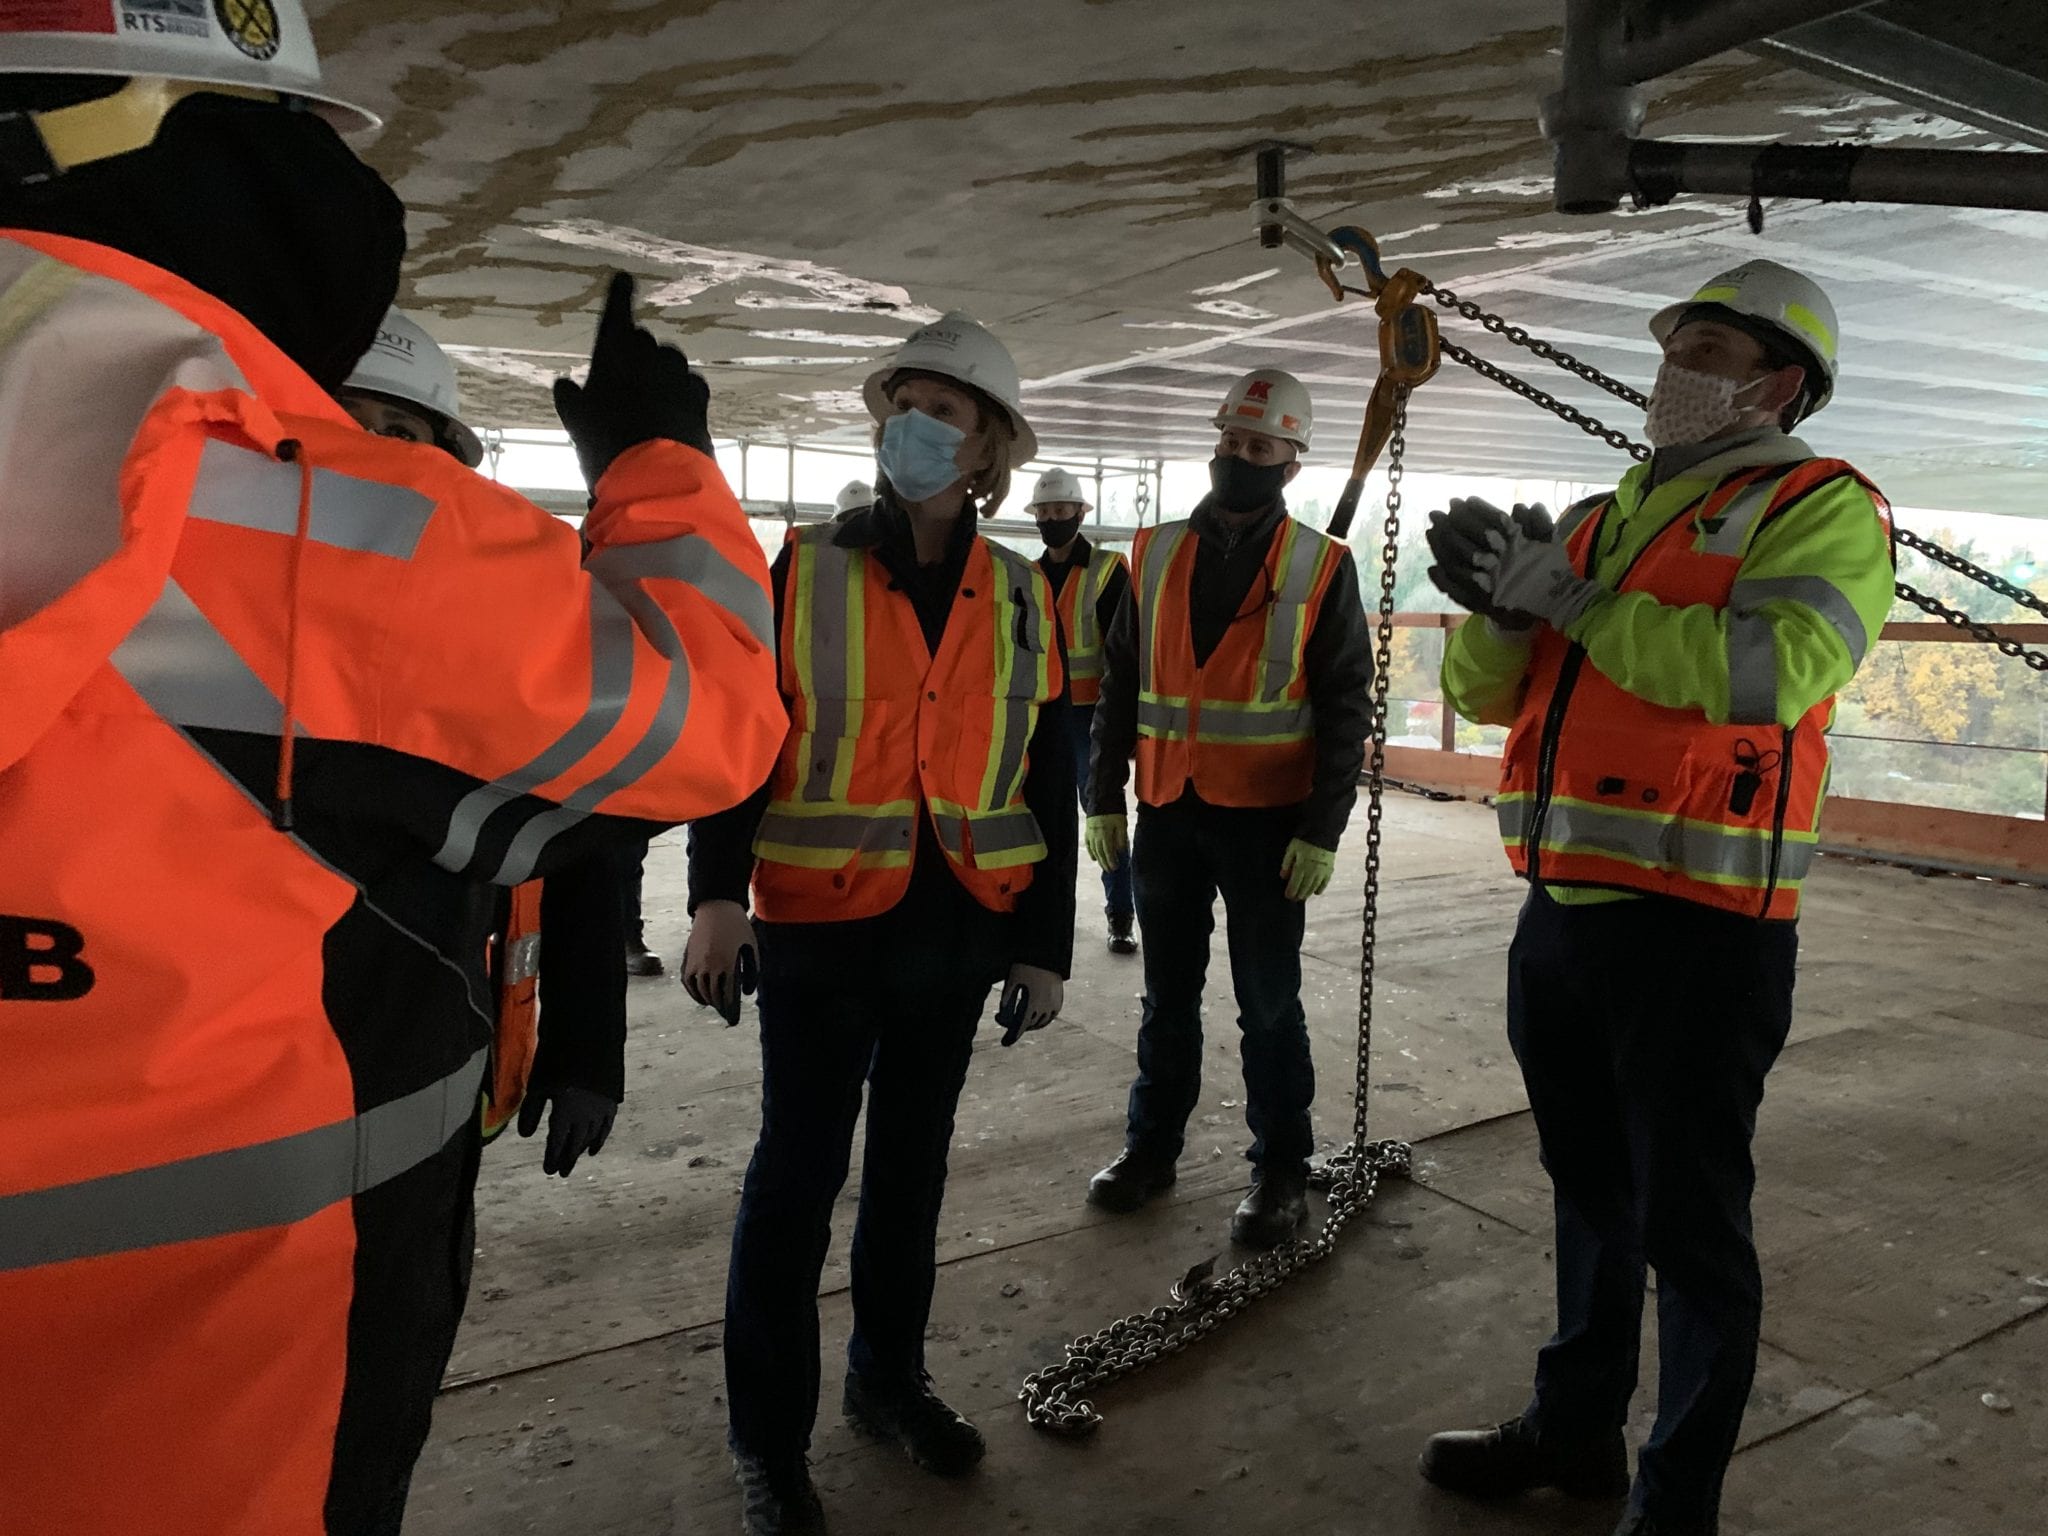 Mayor Durkan and other visitors stand on the West Seattle Bridge work platforms and point up at the bridge.